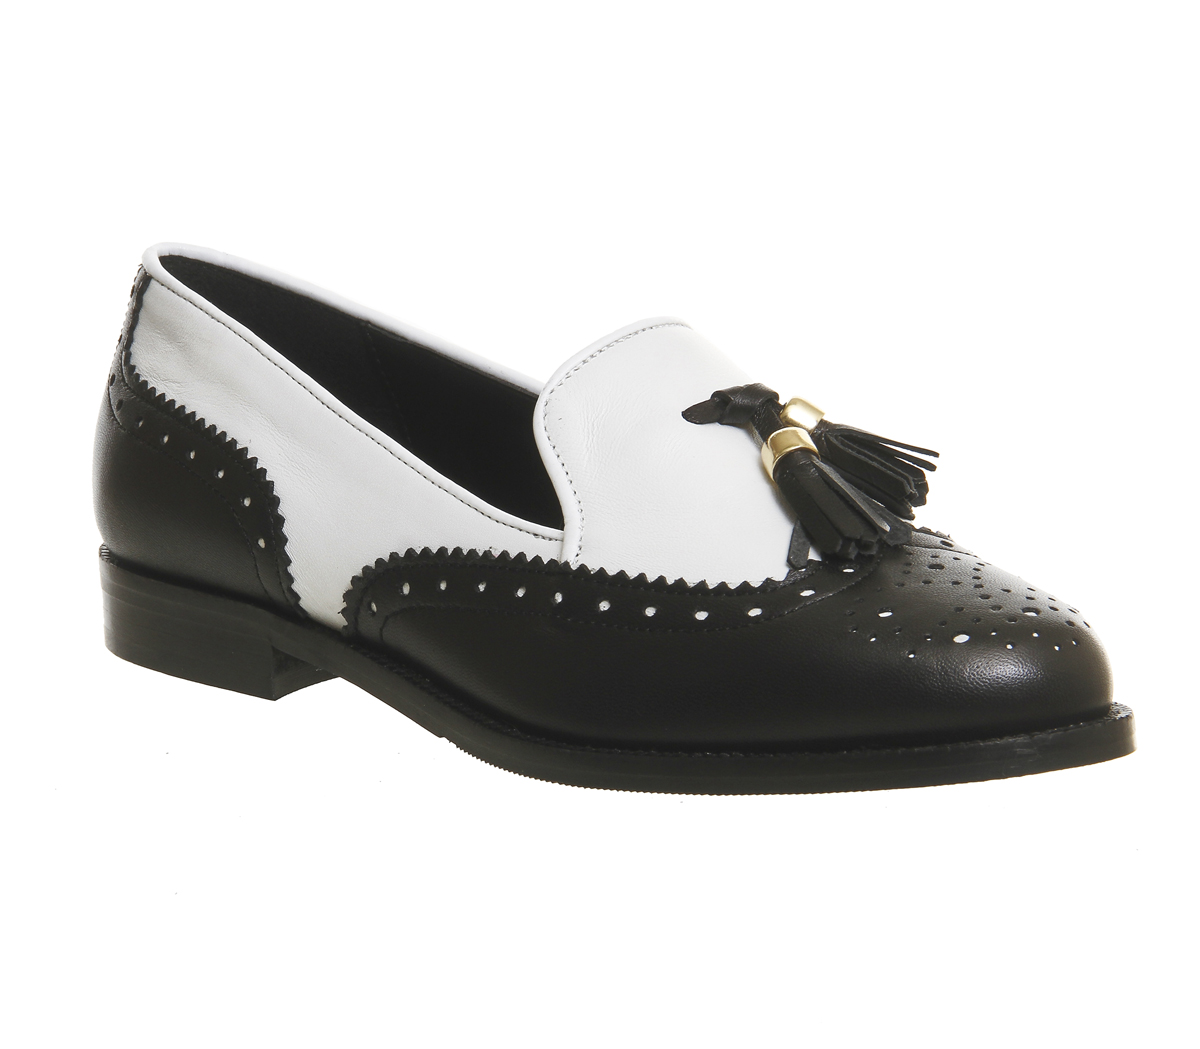 OFFICE Ringo Tassel Brogue Loafers Black White Leather - Flat Shoes for ...